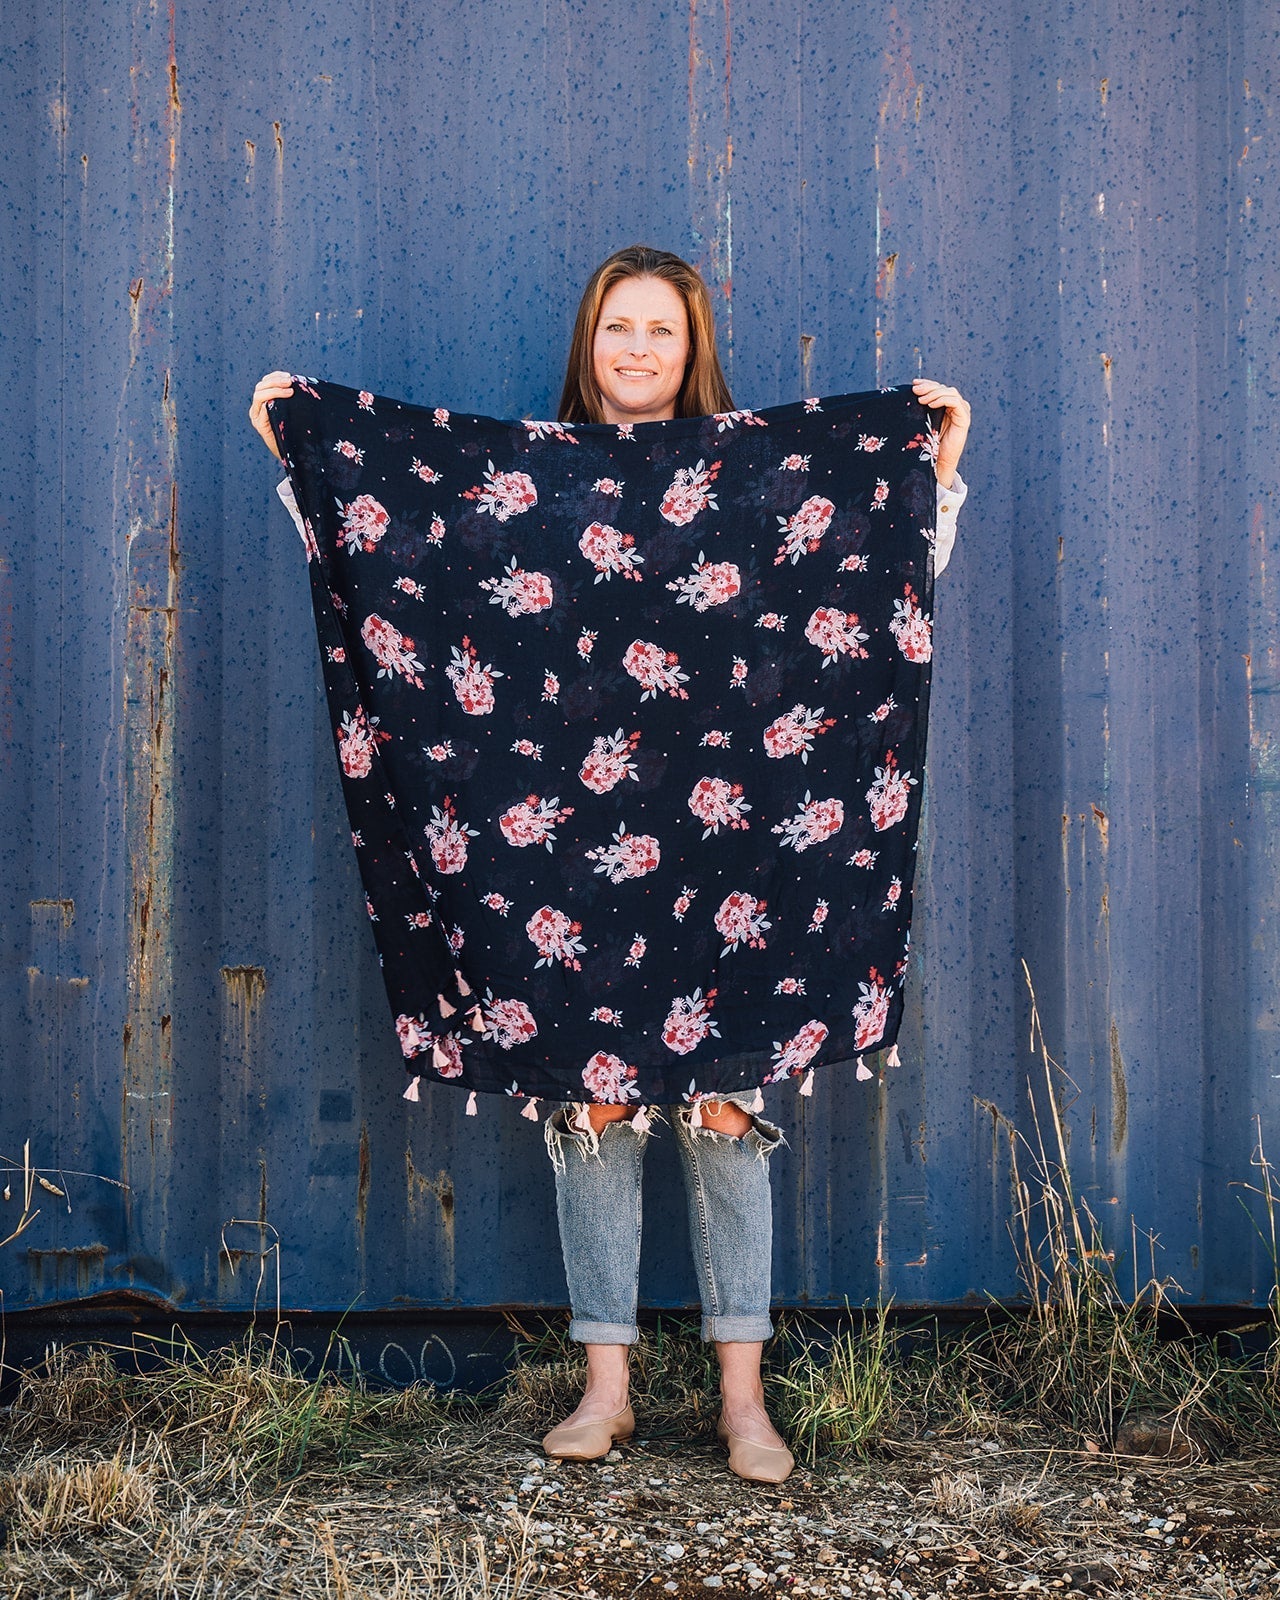 Cassie Cottage Women's Scarf: English garden-inspired floral print in light and raspberry pinks, with a touch of light blue on a navy base. Adorned with light pink tassels. Elevate your style with Cassie's blooming charm!